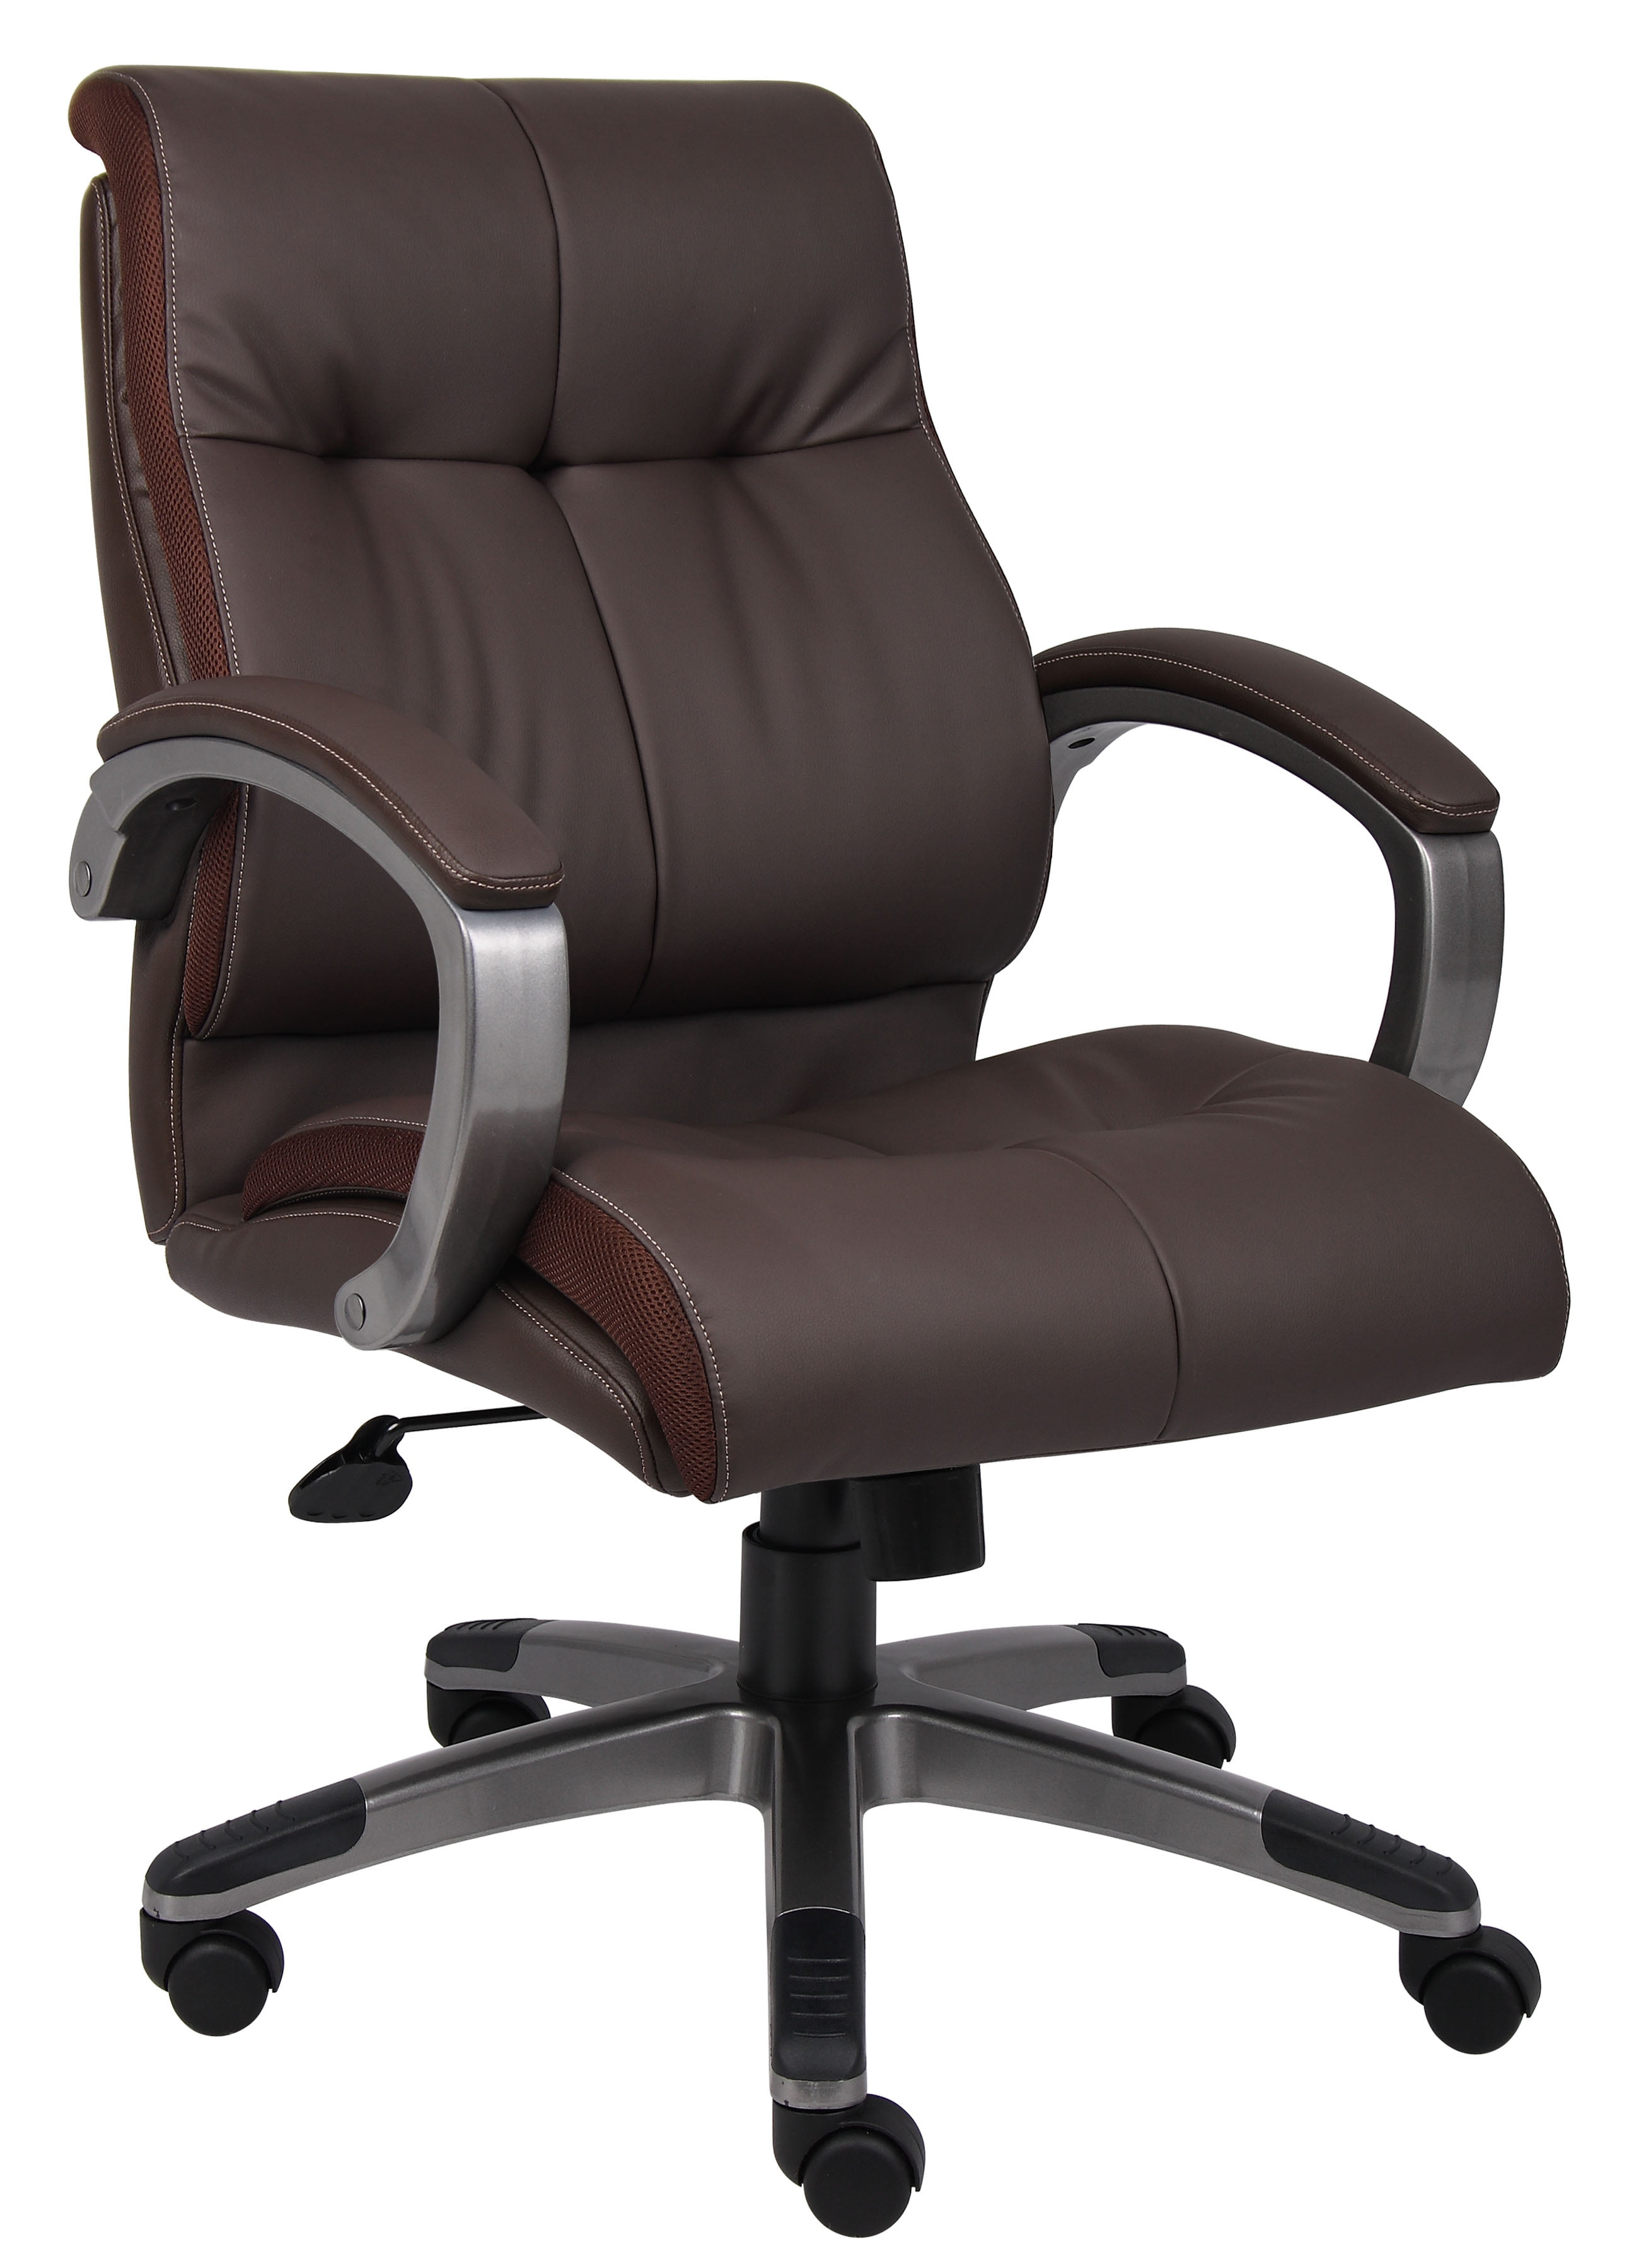 Boss Office & Home Brown Double Plush Mid-back Chair - Walmart.com